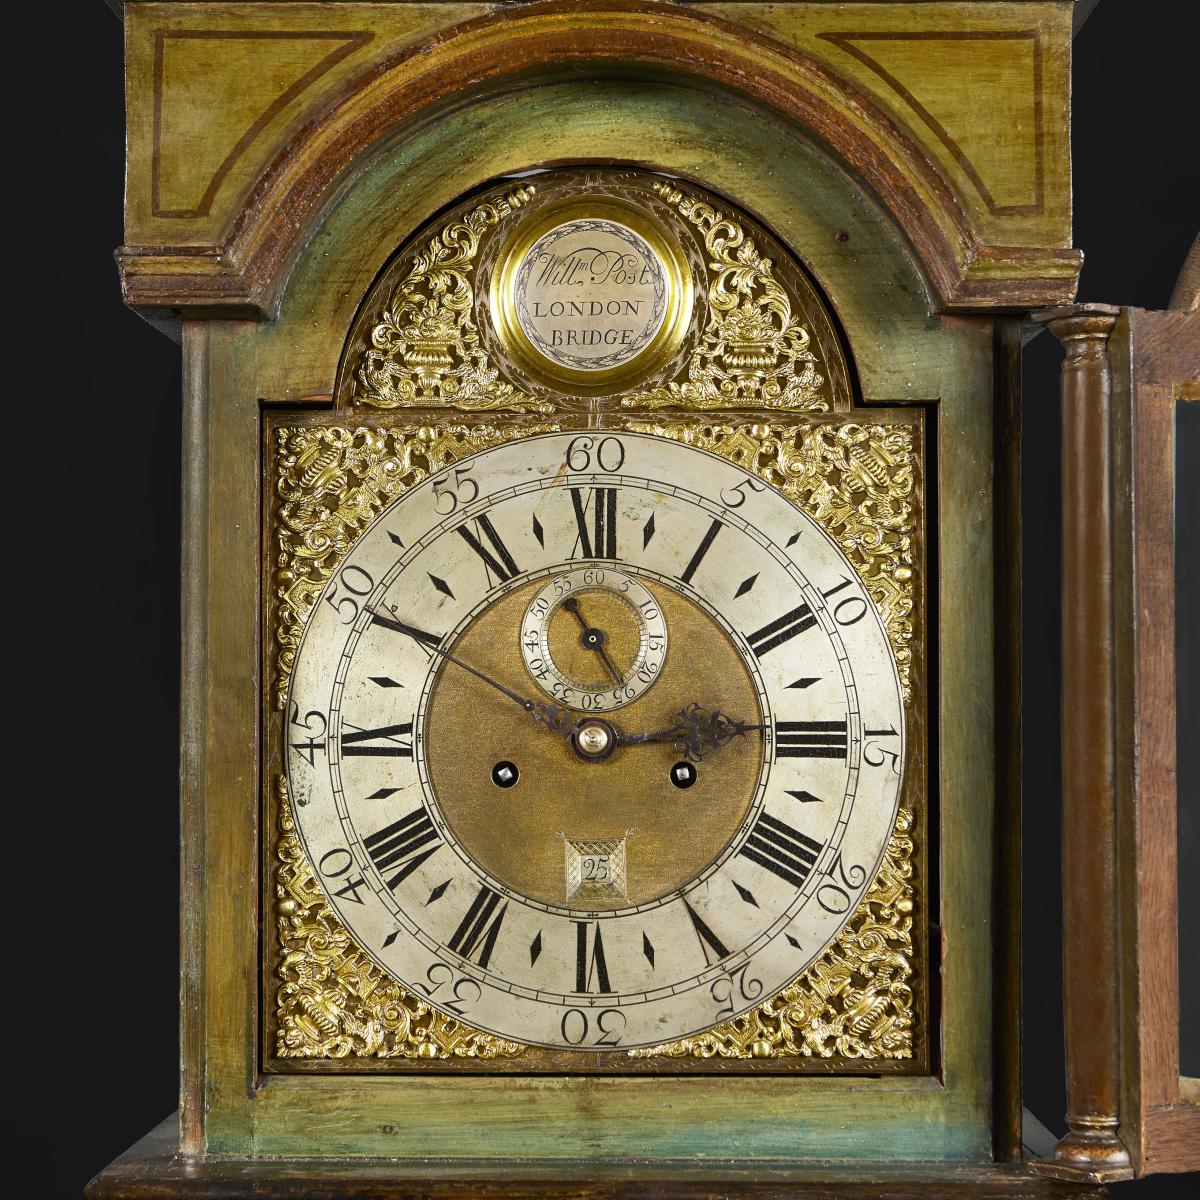 Fine Green Japanned Lacquer Longcase Clock